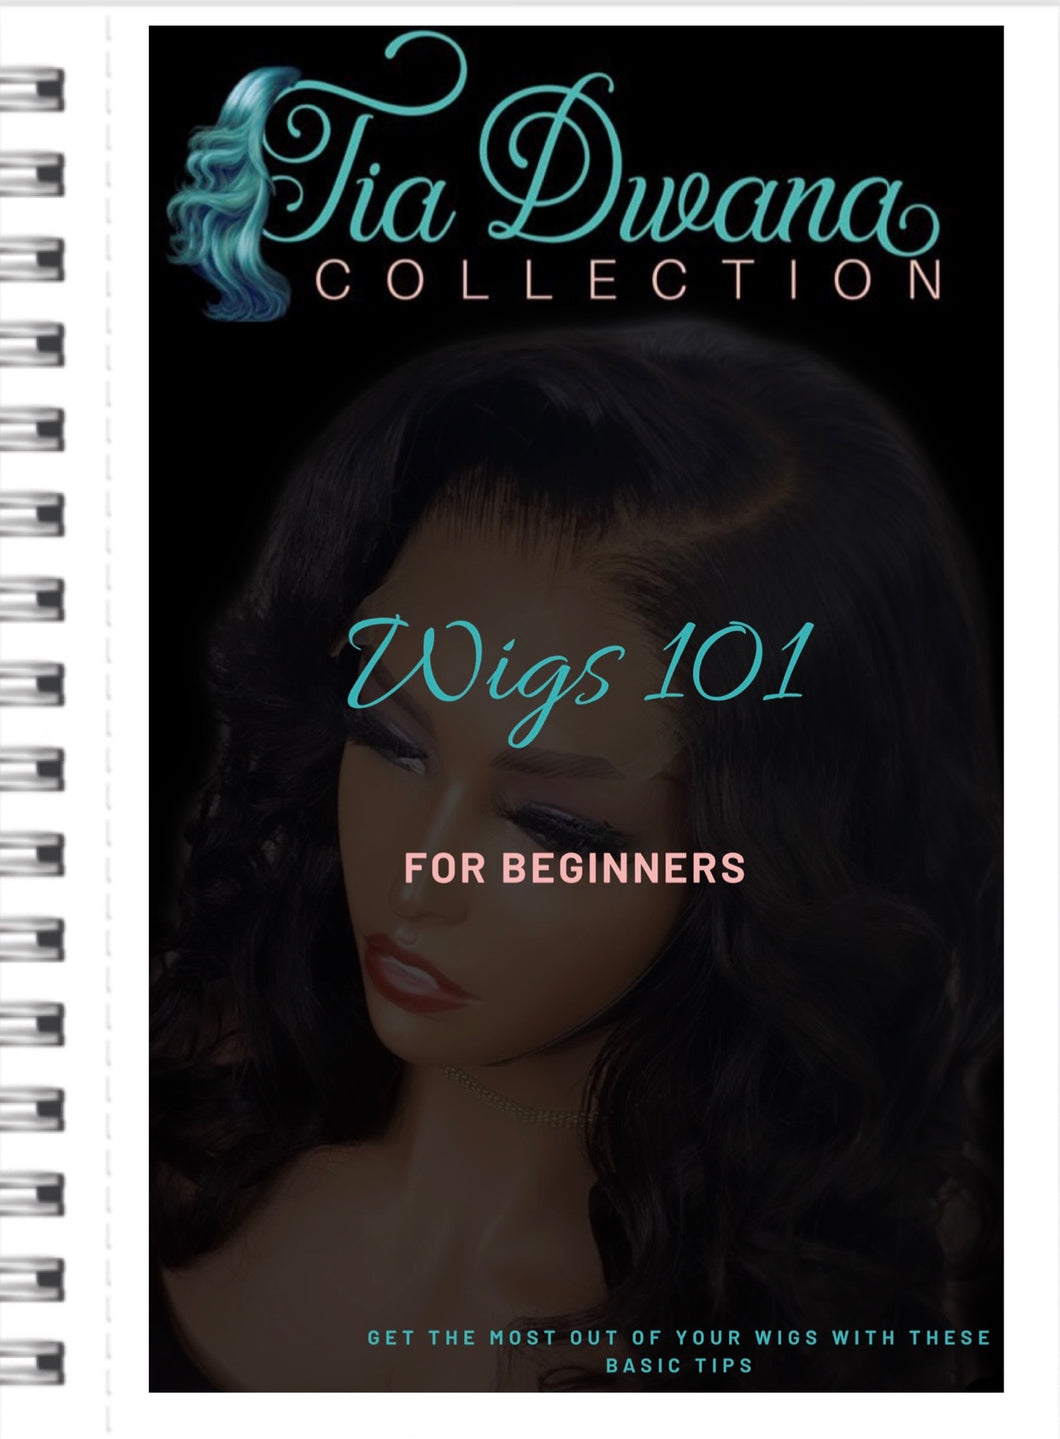 Wigs 101 for Beginners